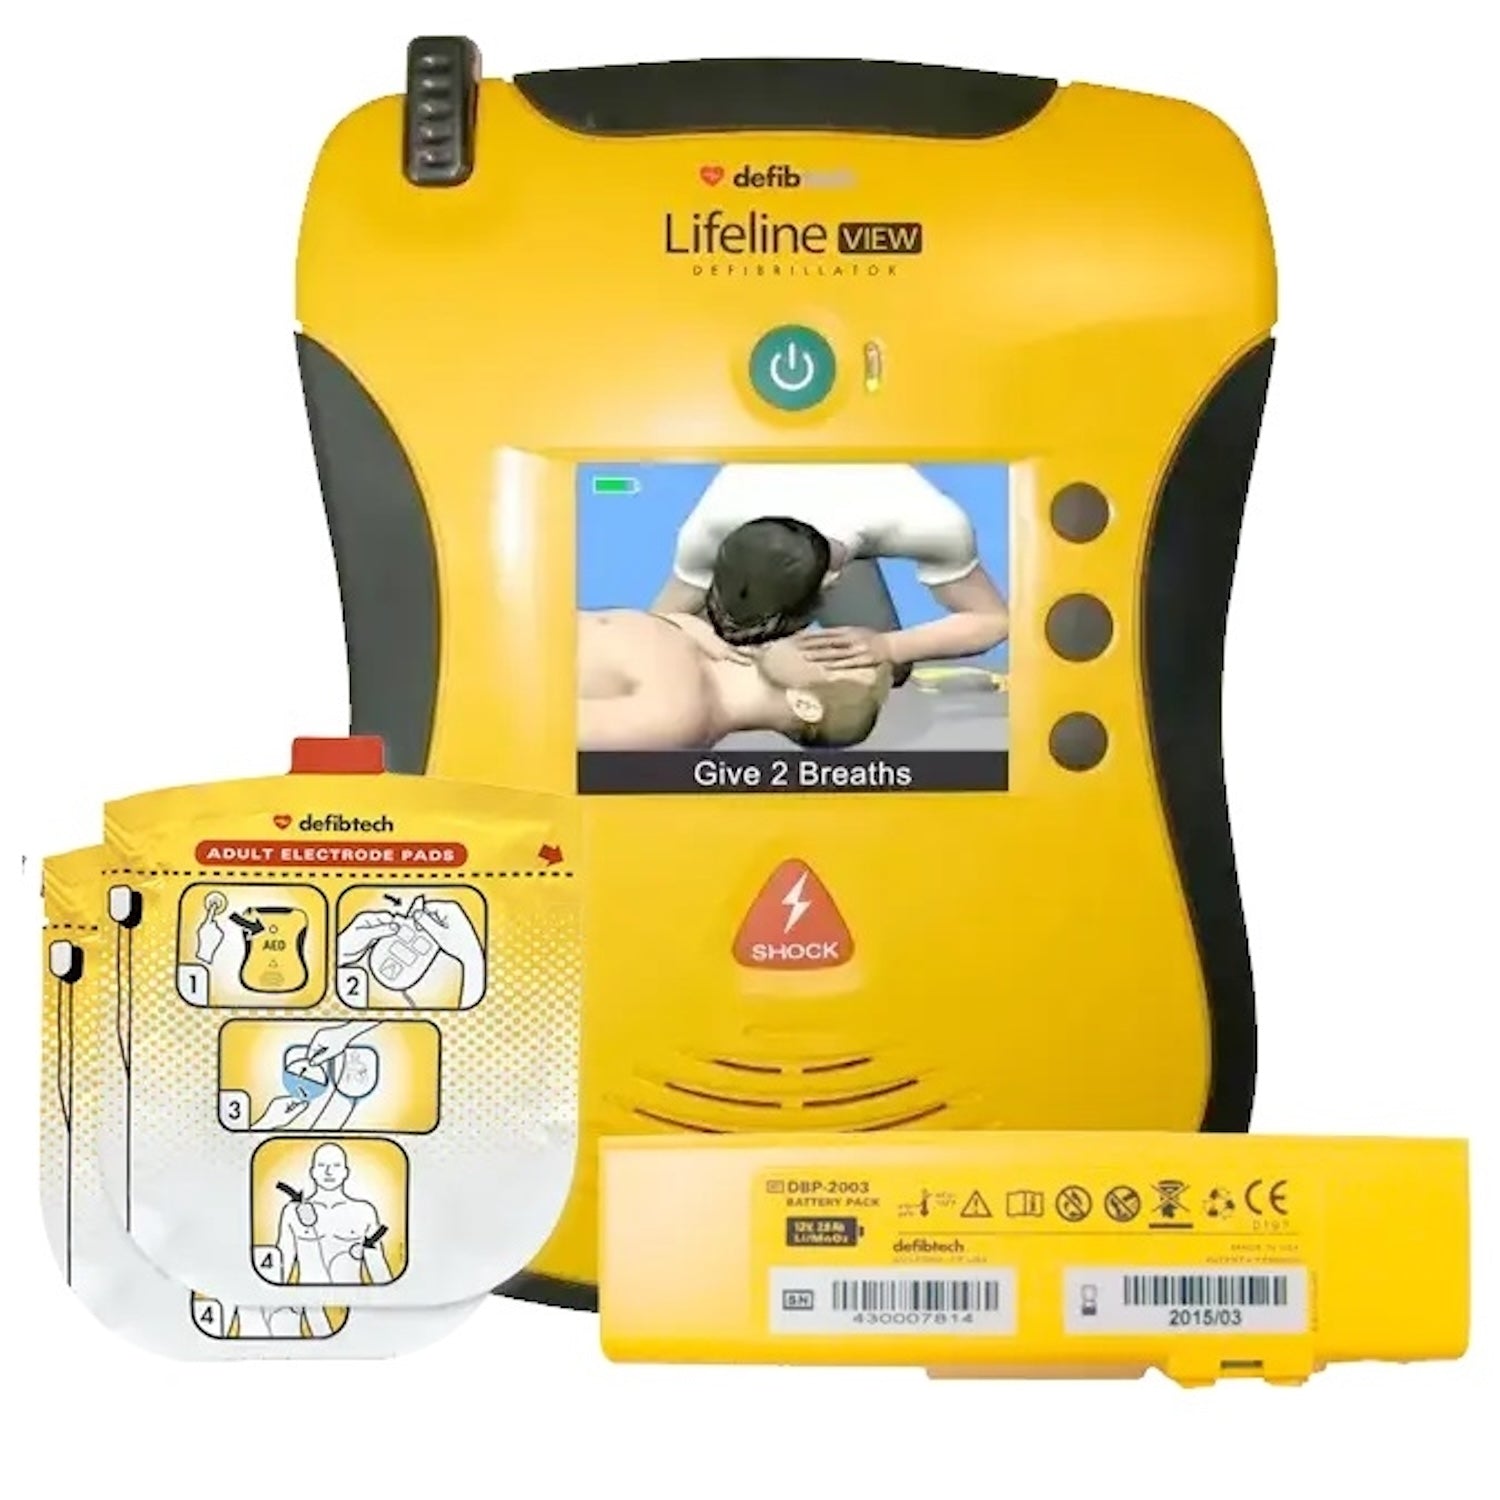 defibtech Lifeline VIEW AED